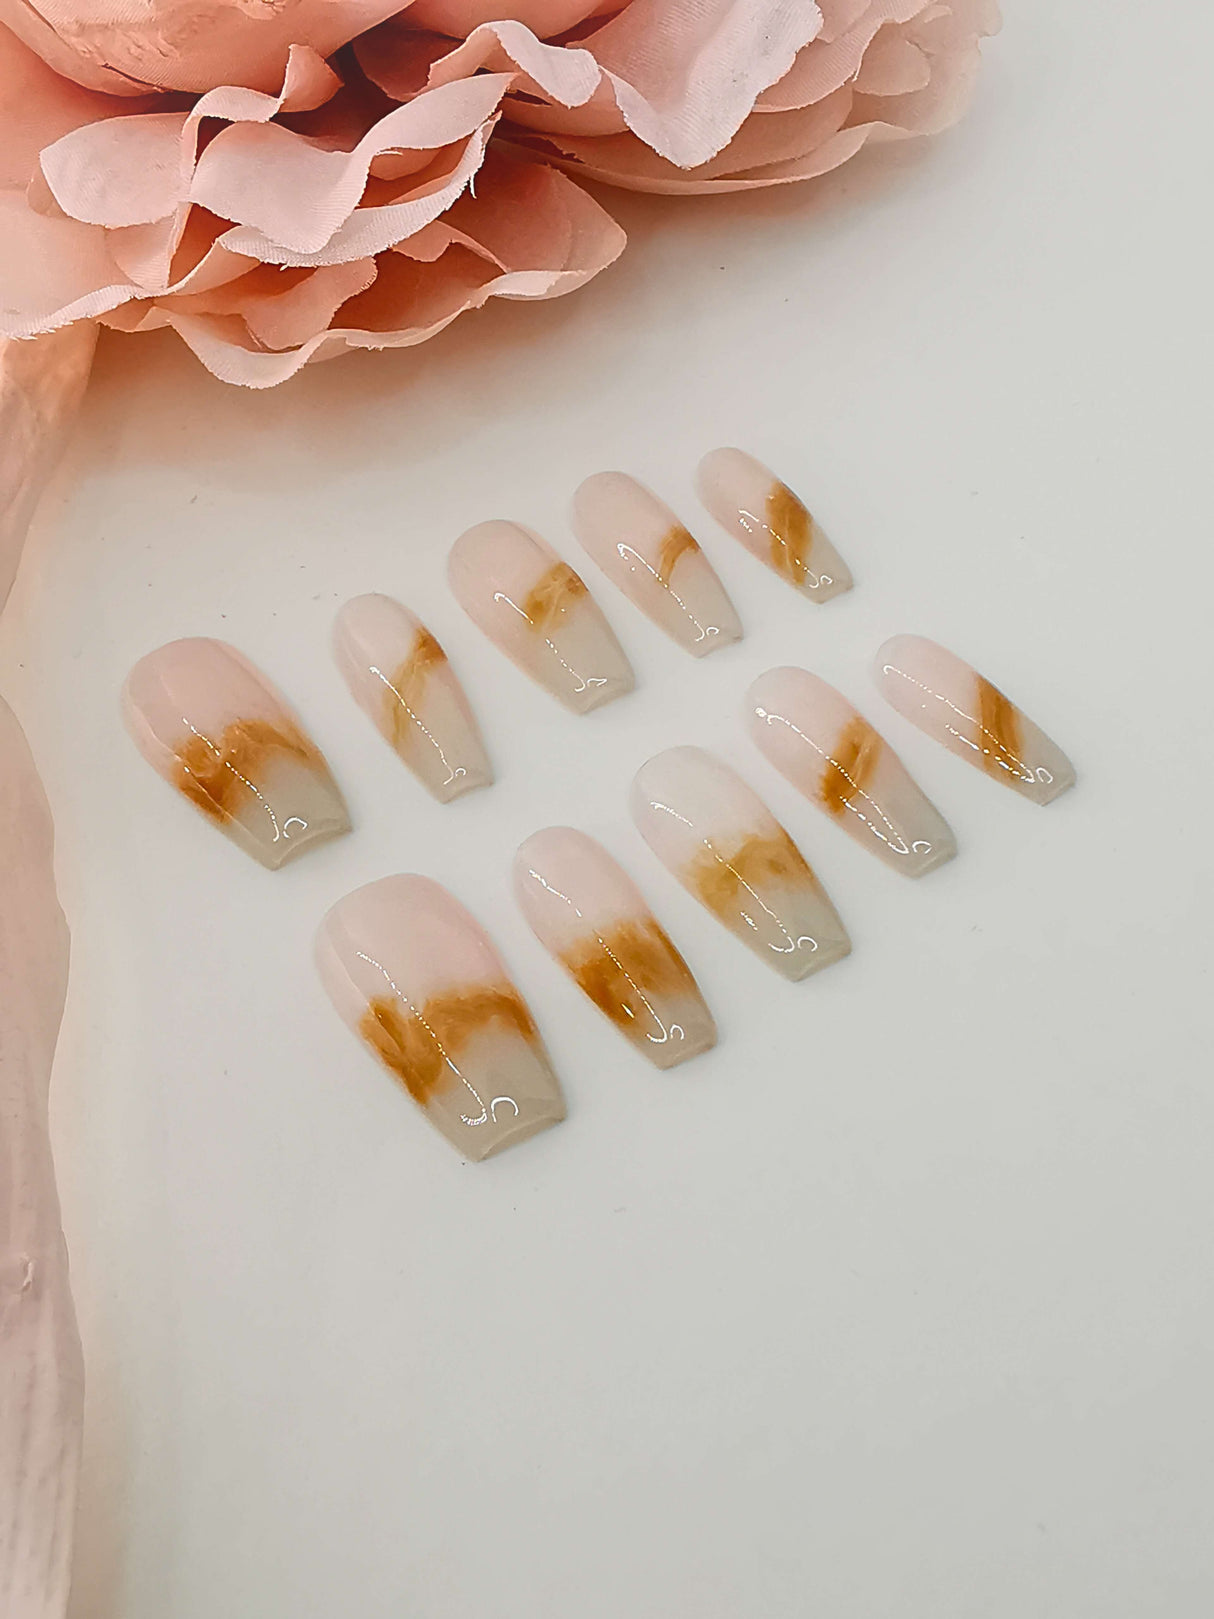 Luxurious and unique nails with ombre effect, marbling, gold foil accents, and long coffin/ballerina shape for special occasions or statement-making looks.